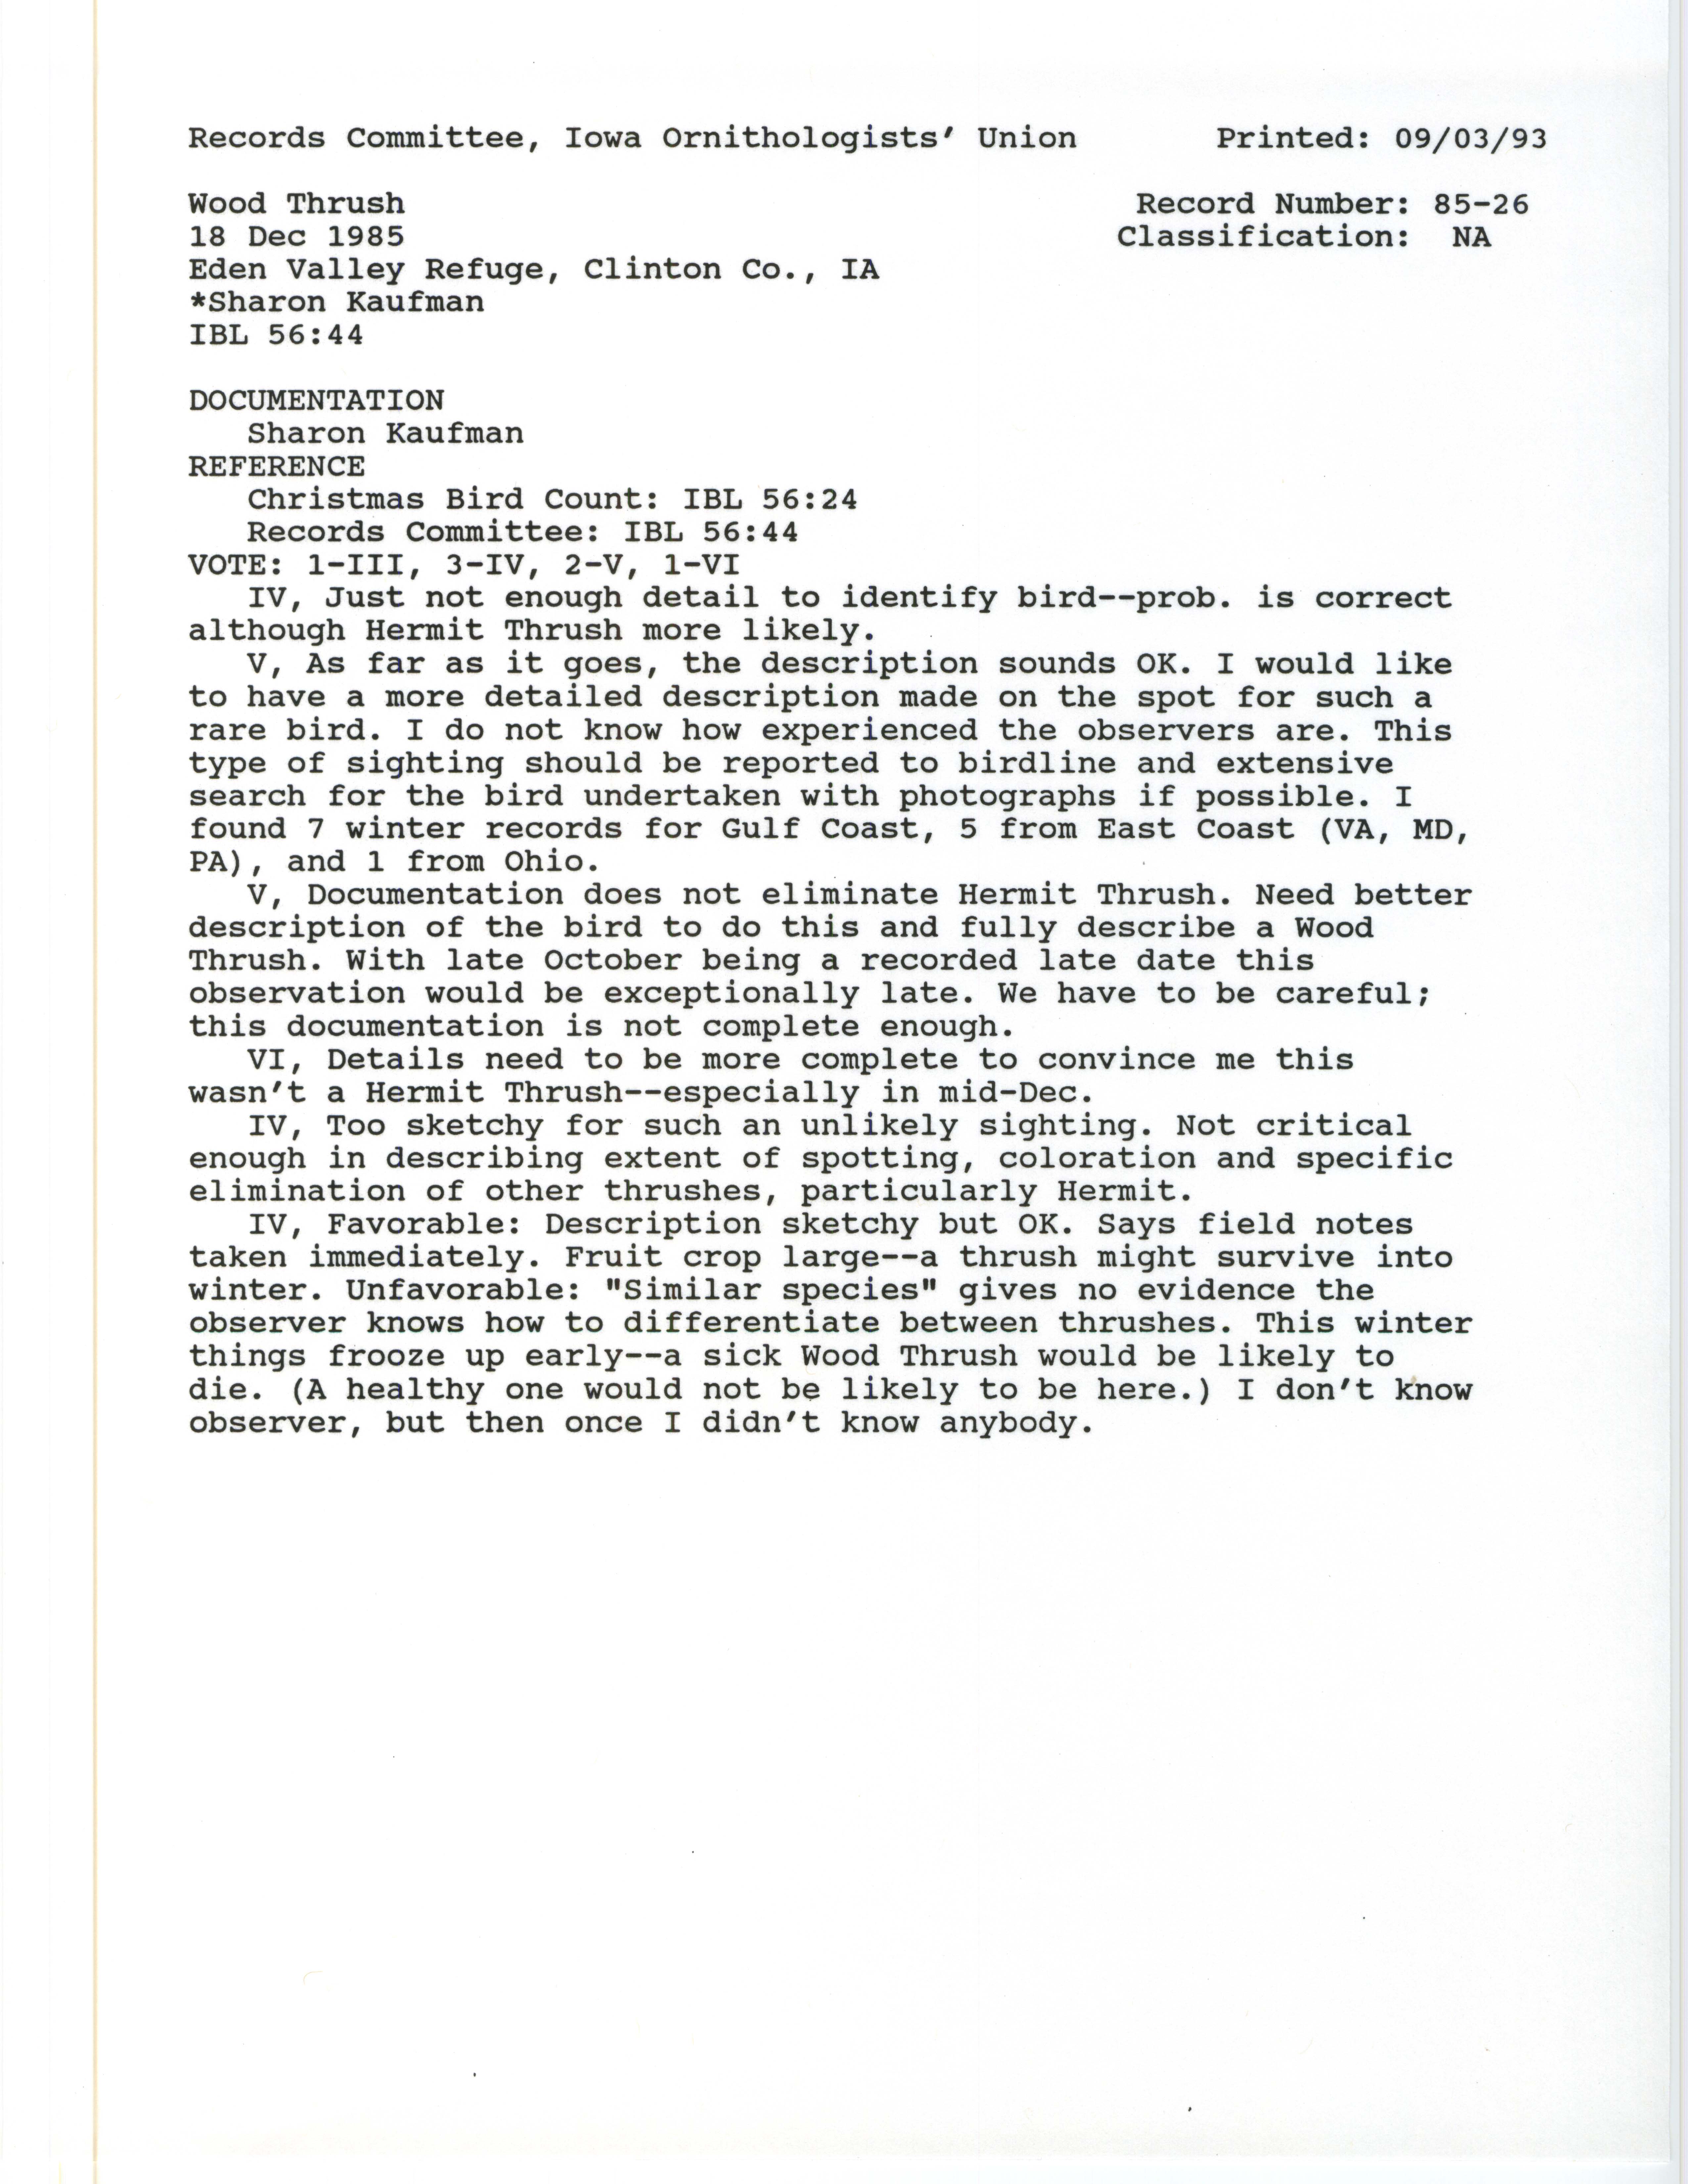 Records Committee review for rare bird sighting for Wood Thrush at Eden Valley Refuge, 1985